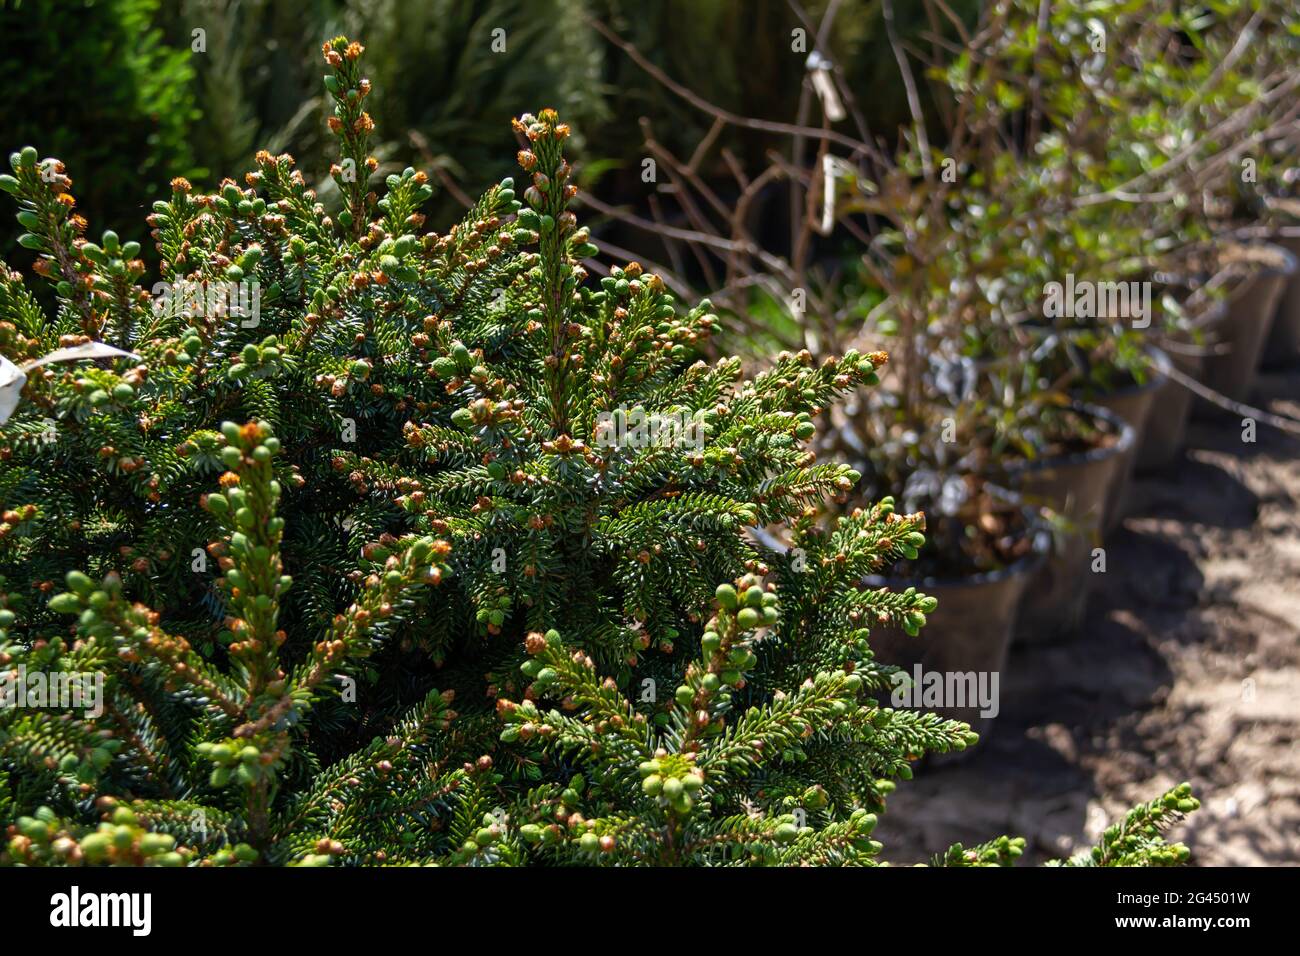 Sale of young seedlings in the garden center. Evergreen conifers for use in the garden landscape. Stock Photo